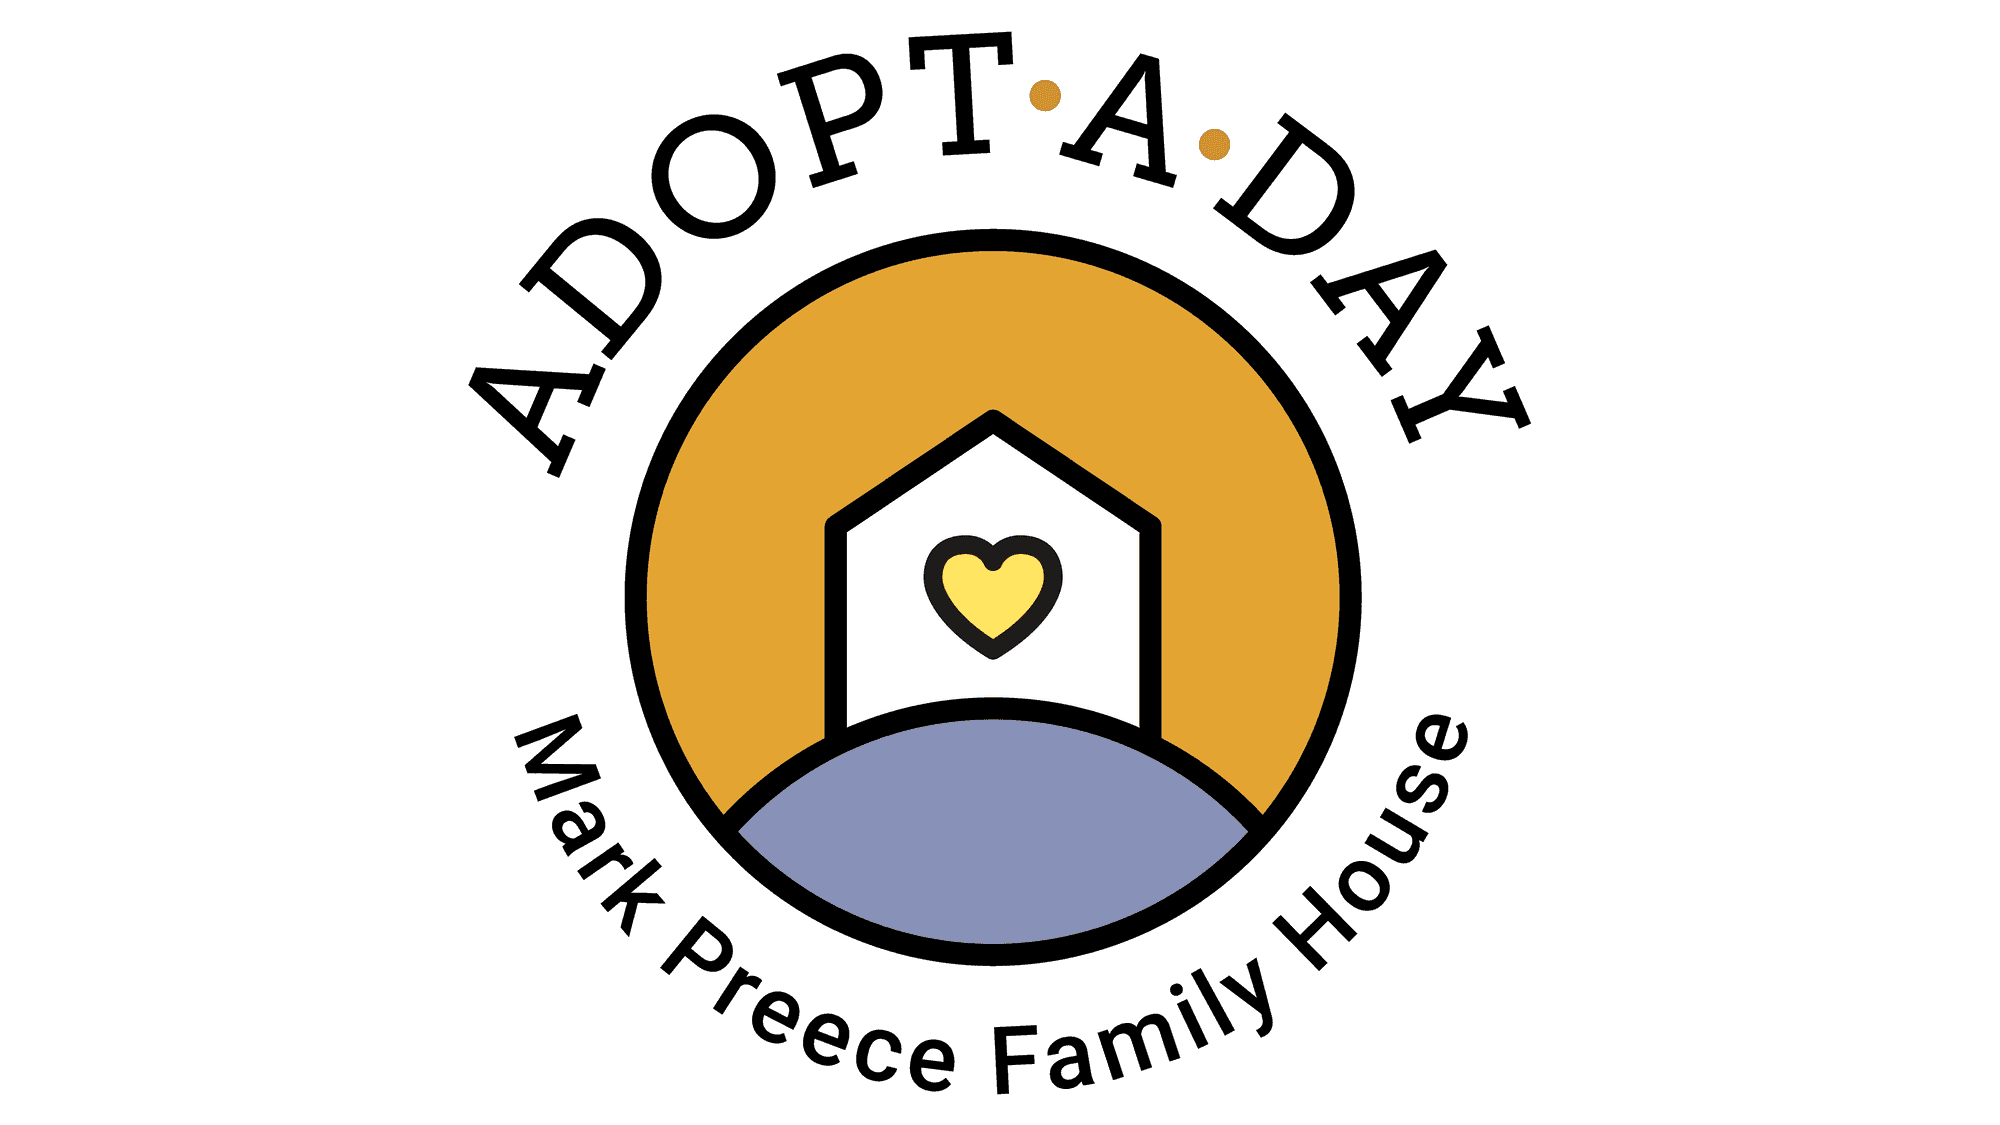 Adopt-A-Day supporting image.